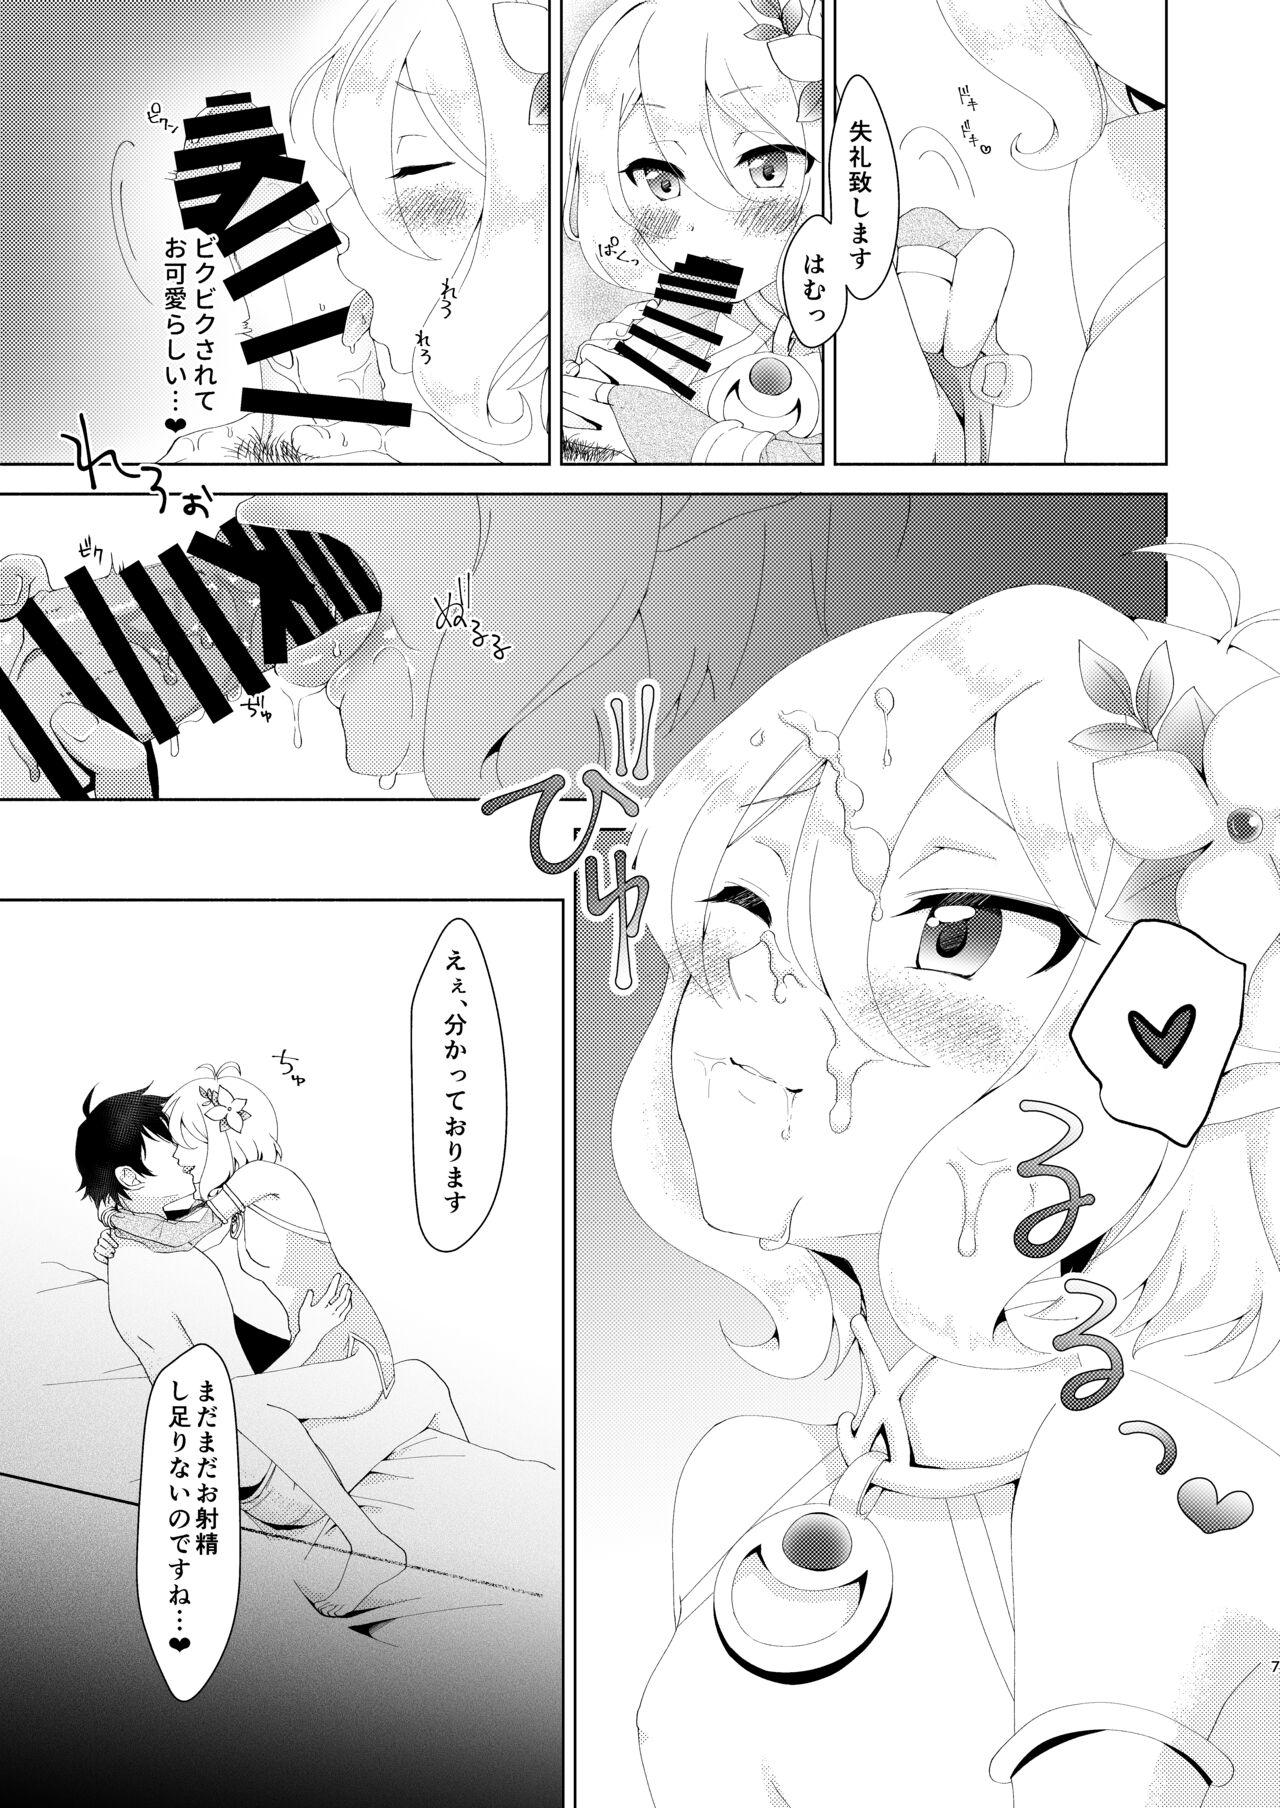 Vietnamese Yandere Connect - Princess connect Tiny - Page 5